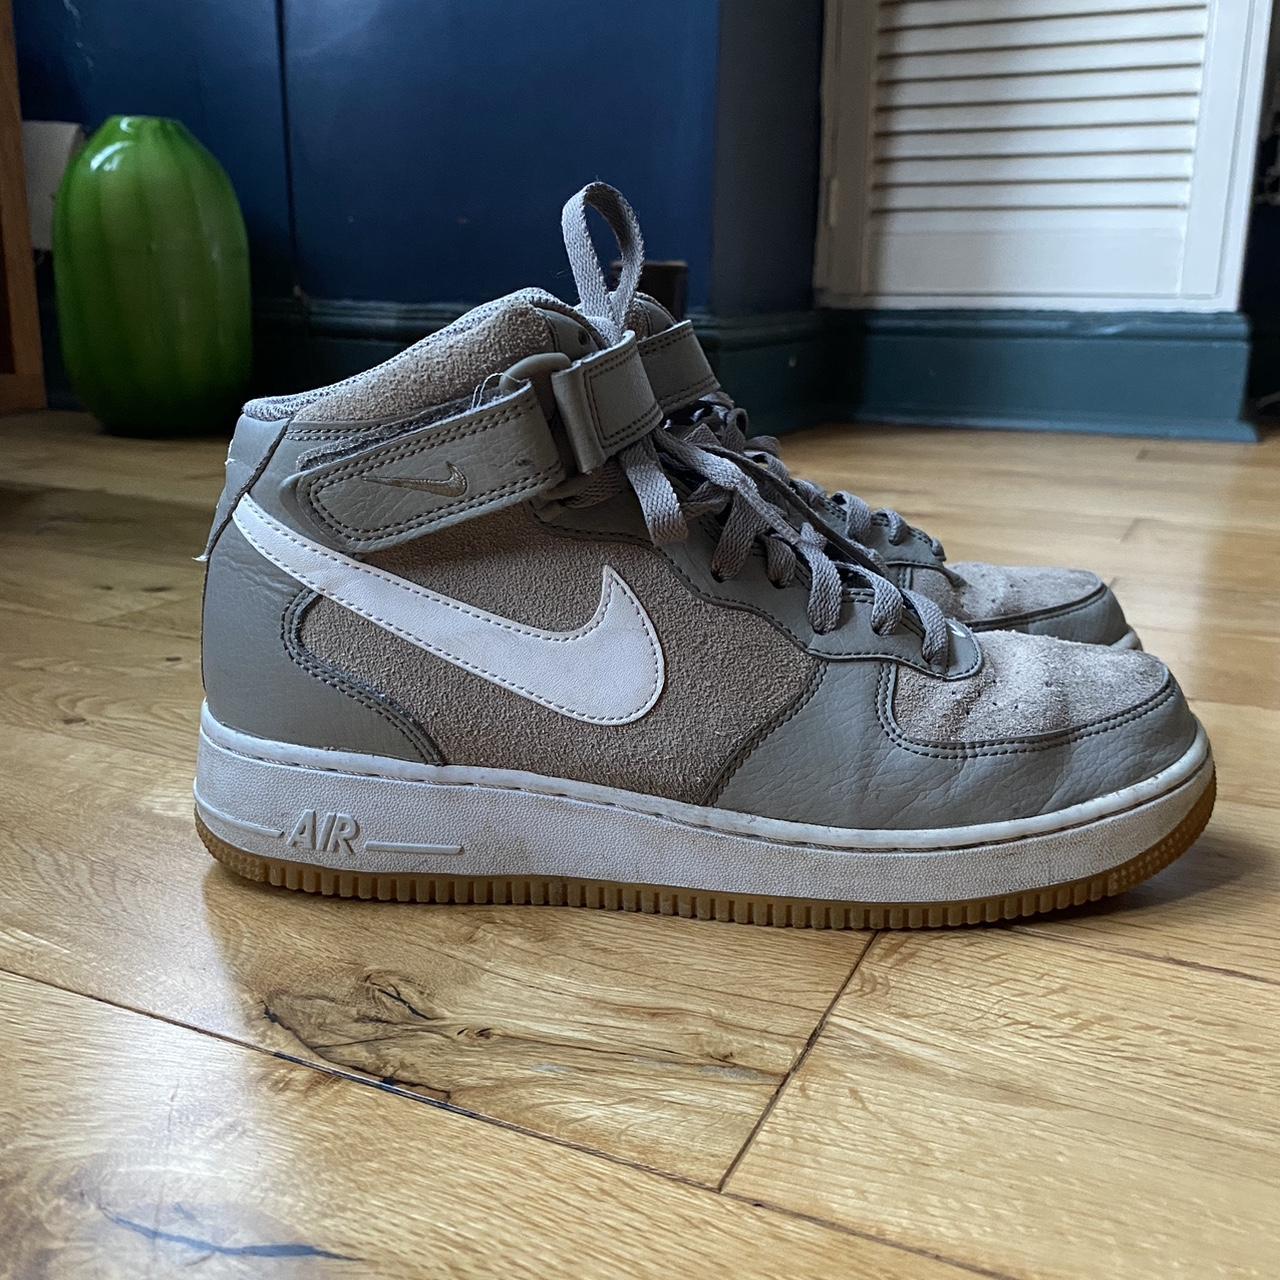 Grey suede high top air force 1s in a size 6 The... - Depop